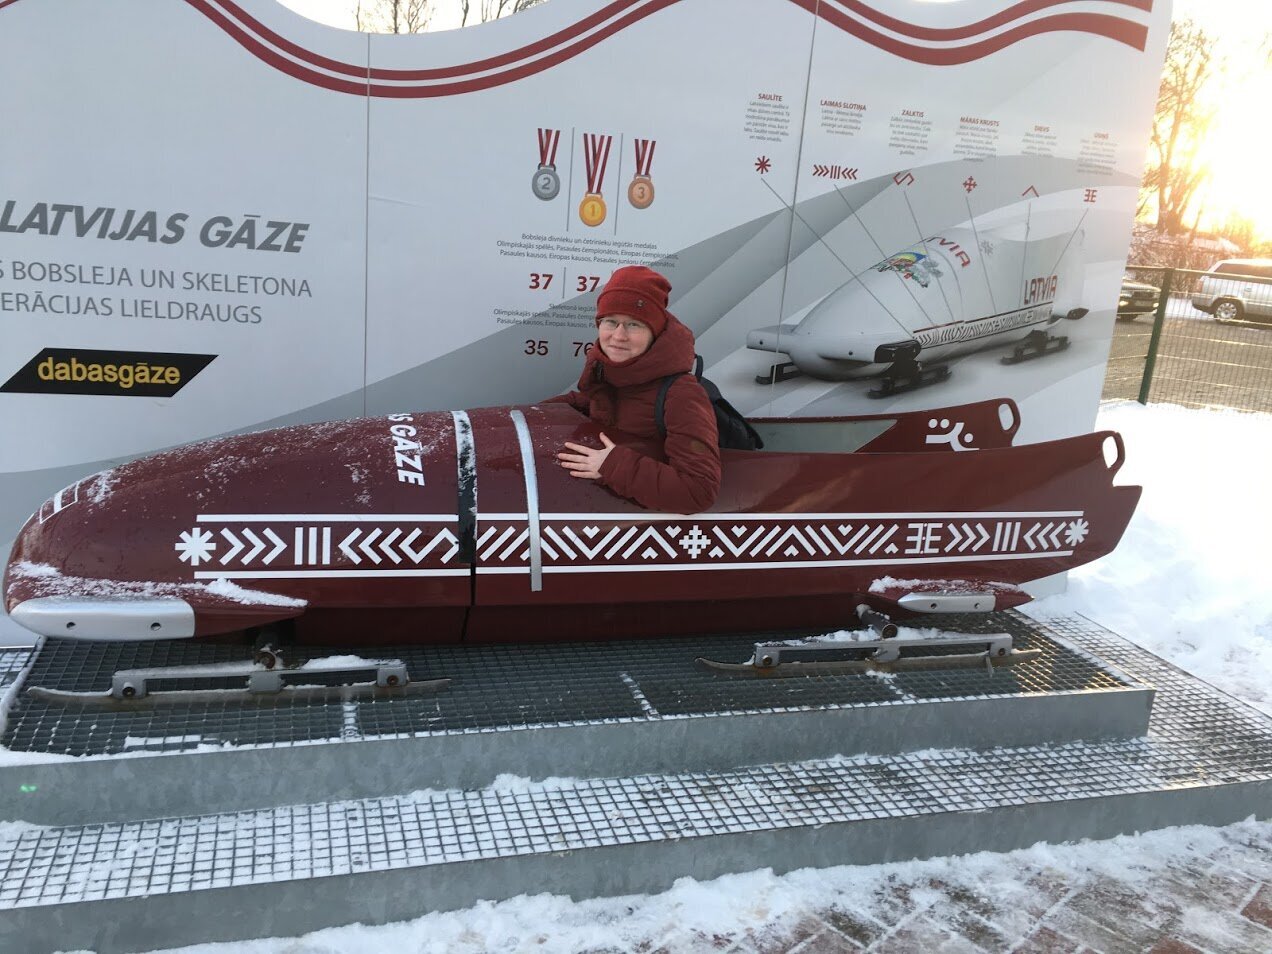 Bobsledding sleds by the track.